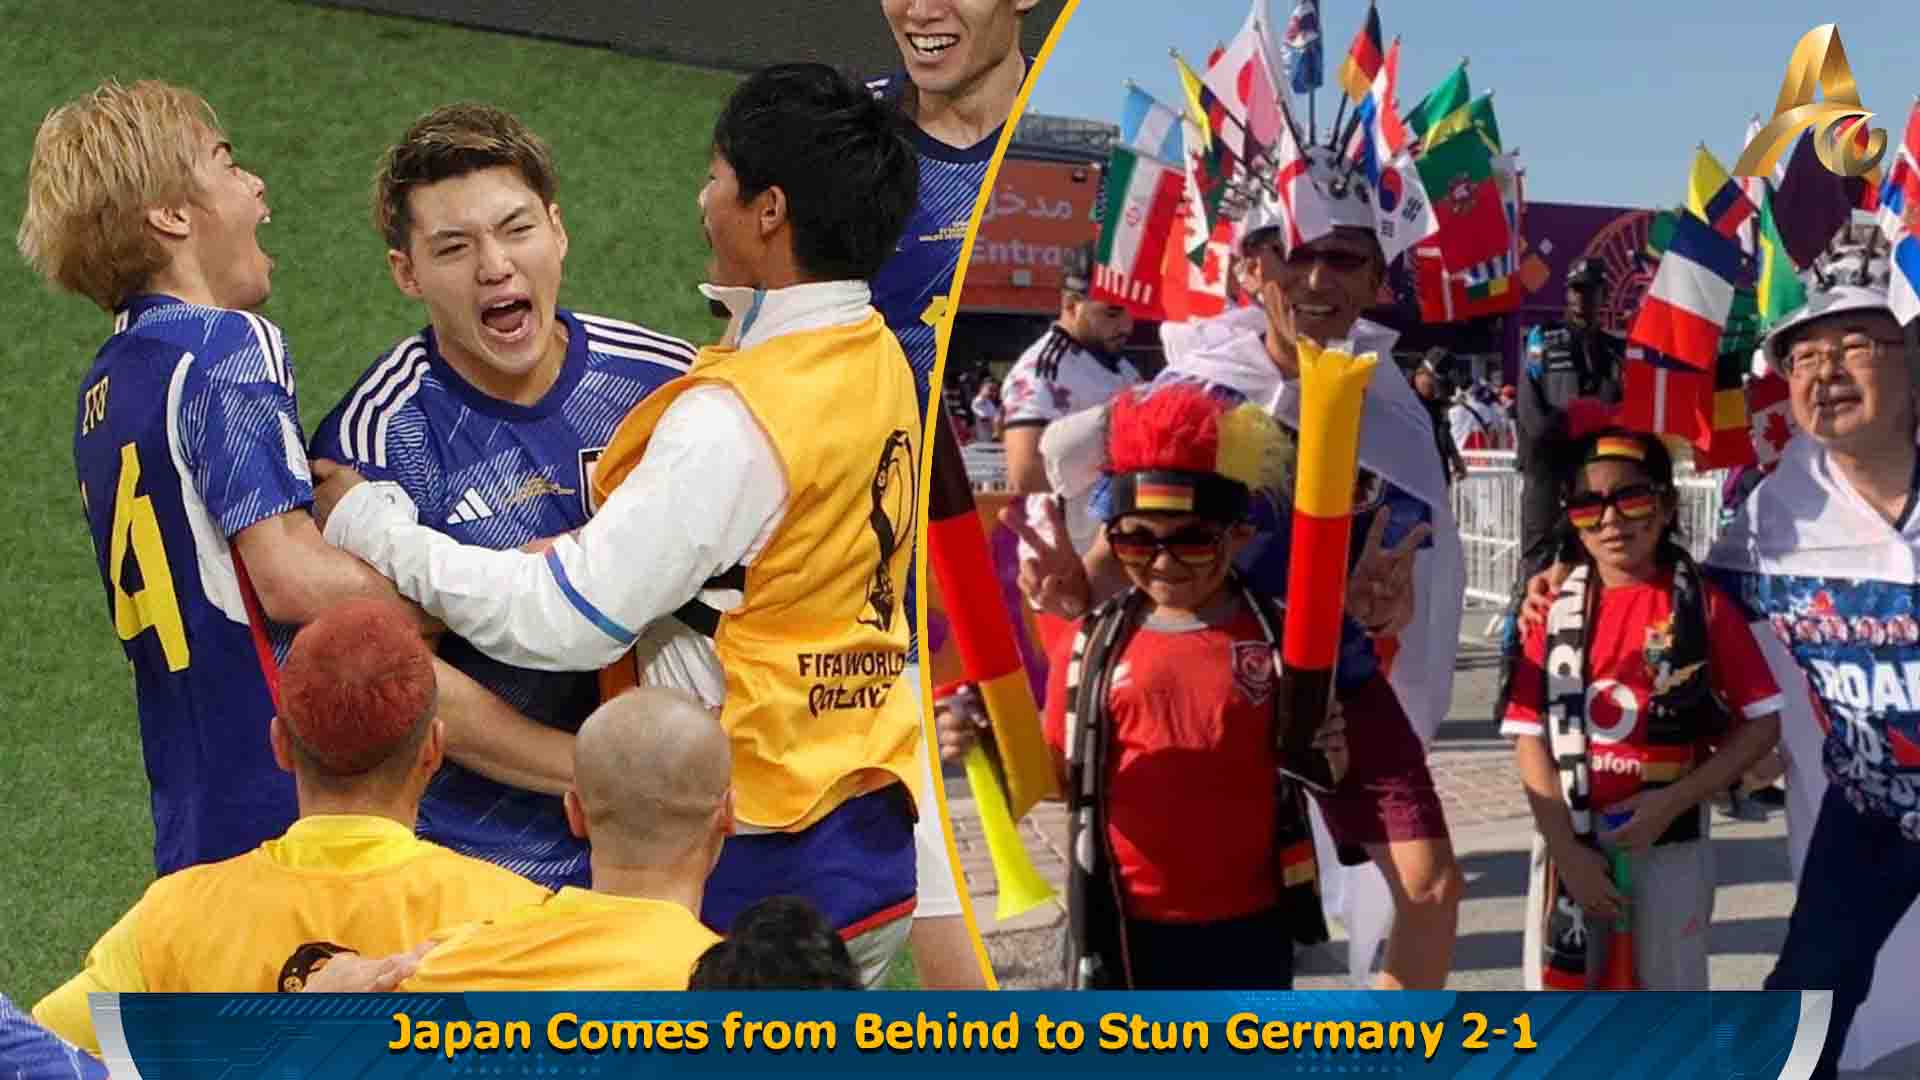 Japan stun Germany with late strikes - Global Times